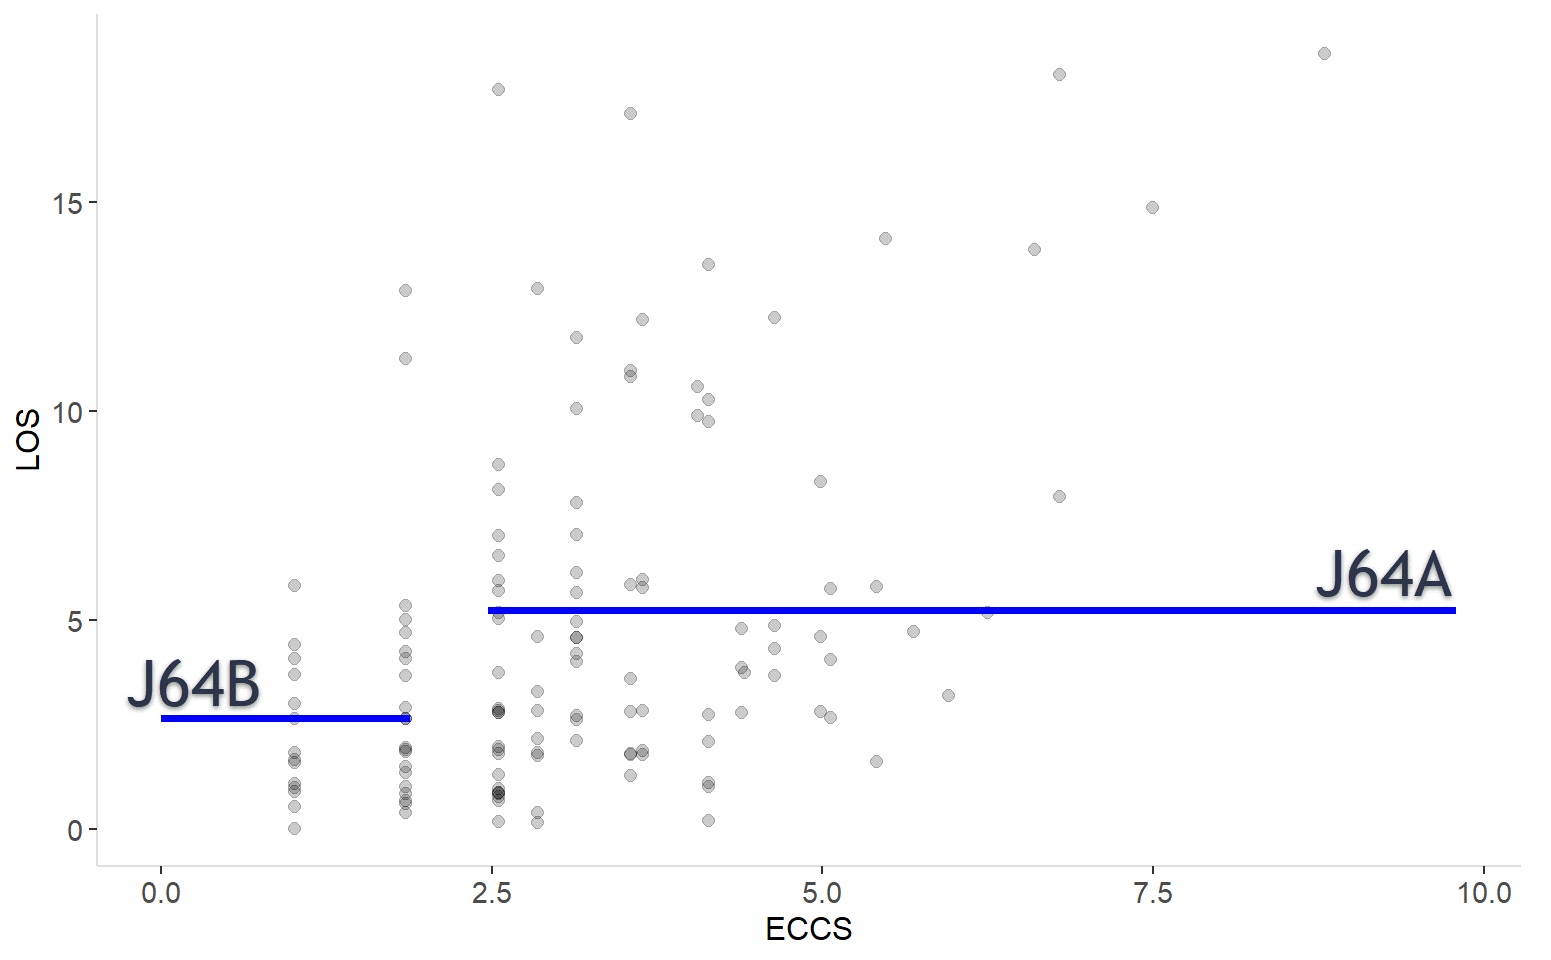 J64 – Cellulitis episodes with expected LOS shown in blue using the RSI v1 model